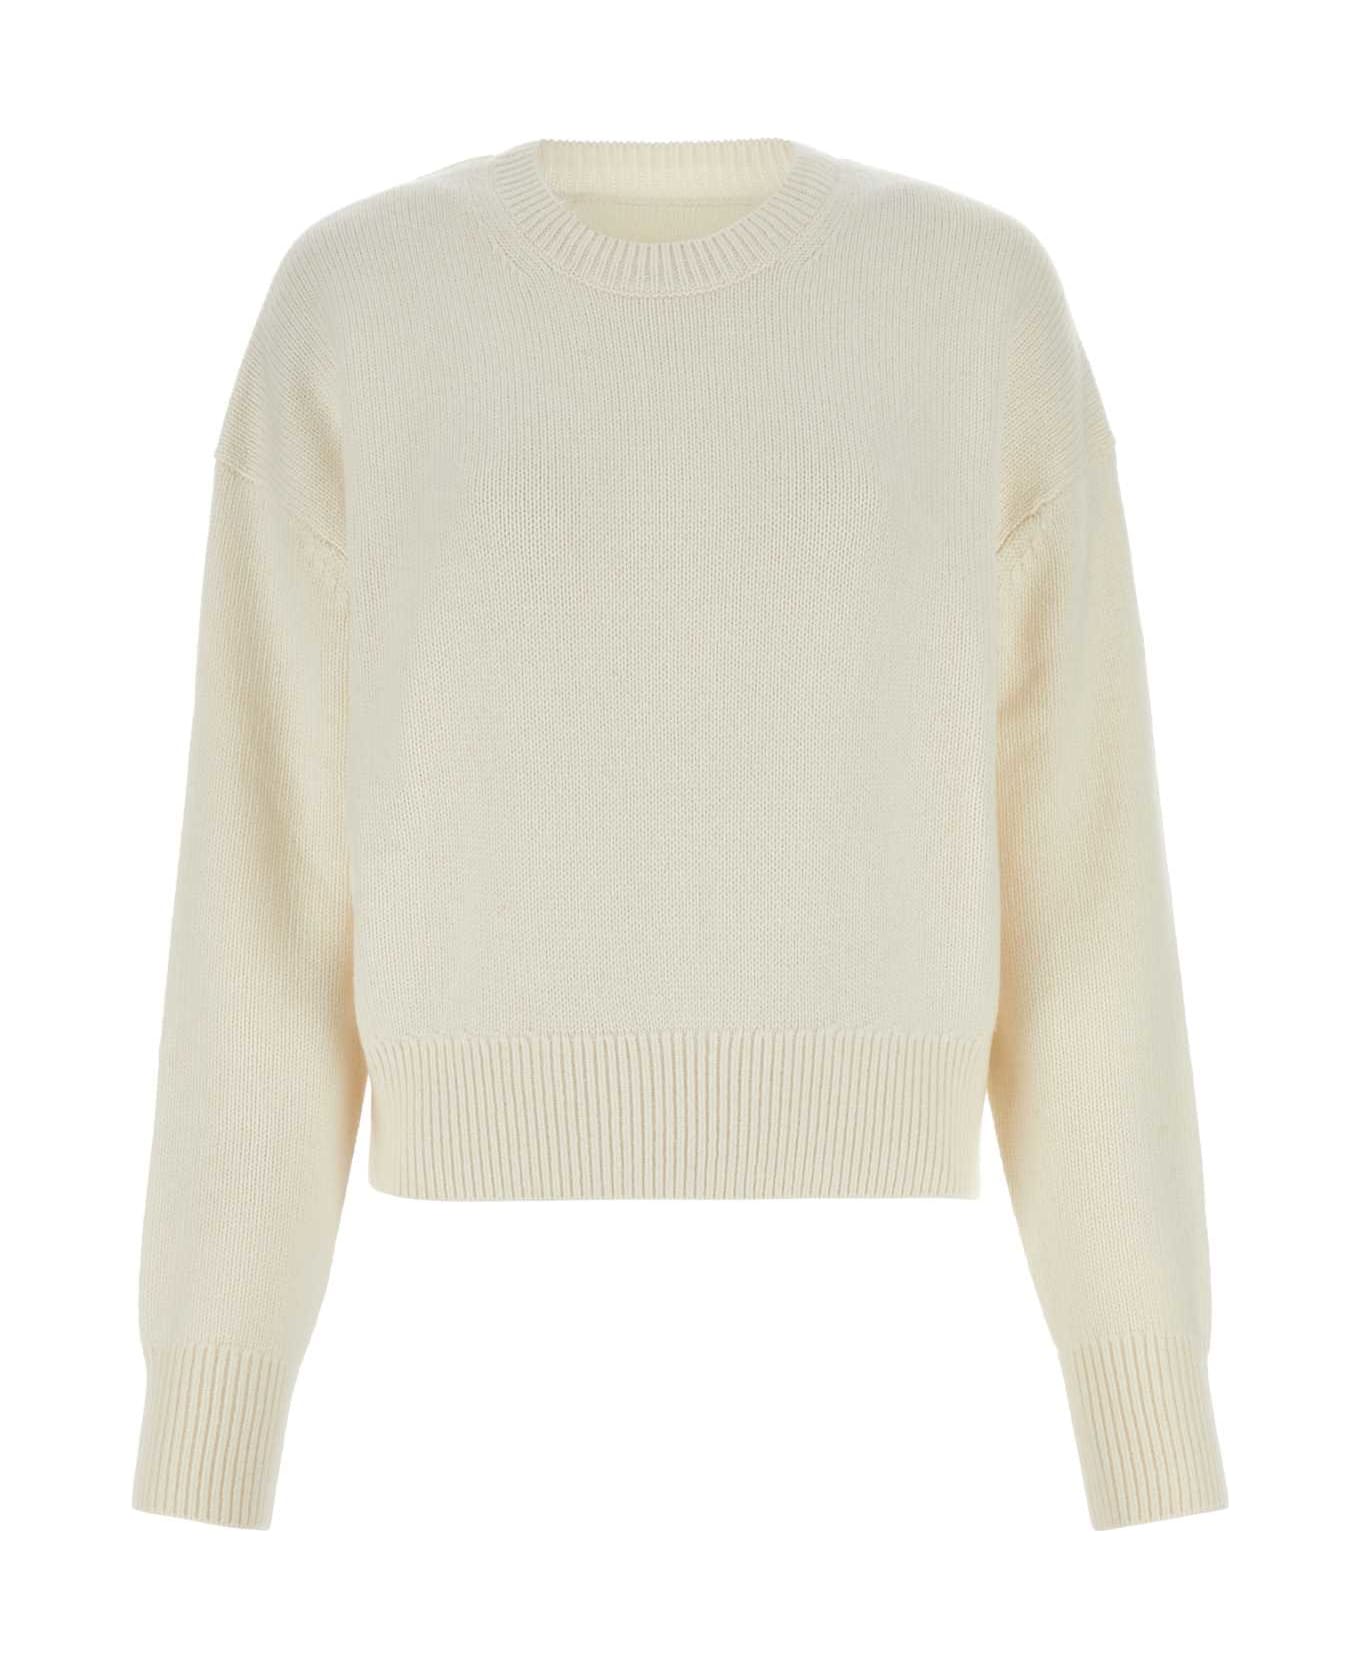 Givenchy Cashmere Sweater - IVORY